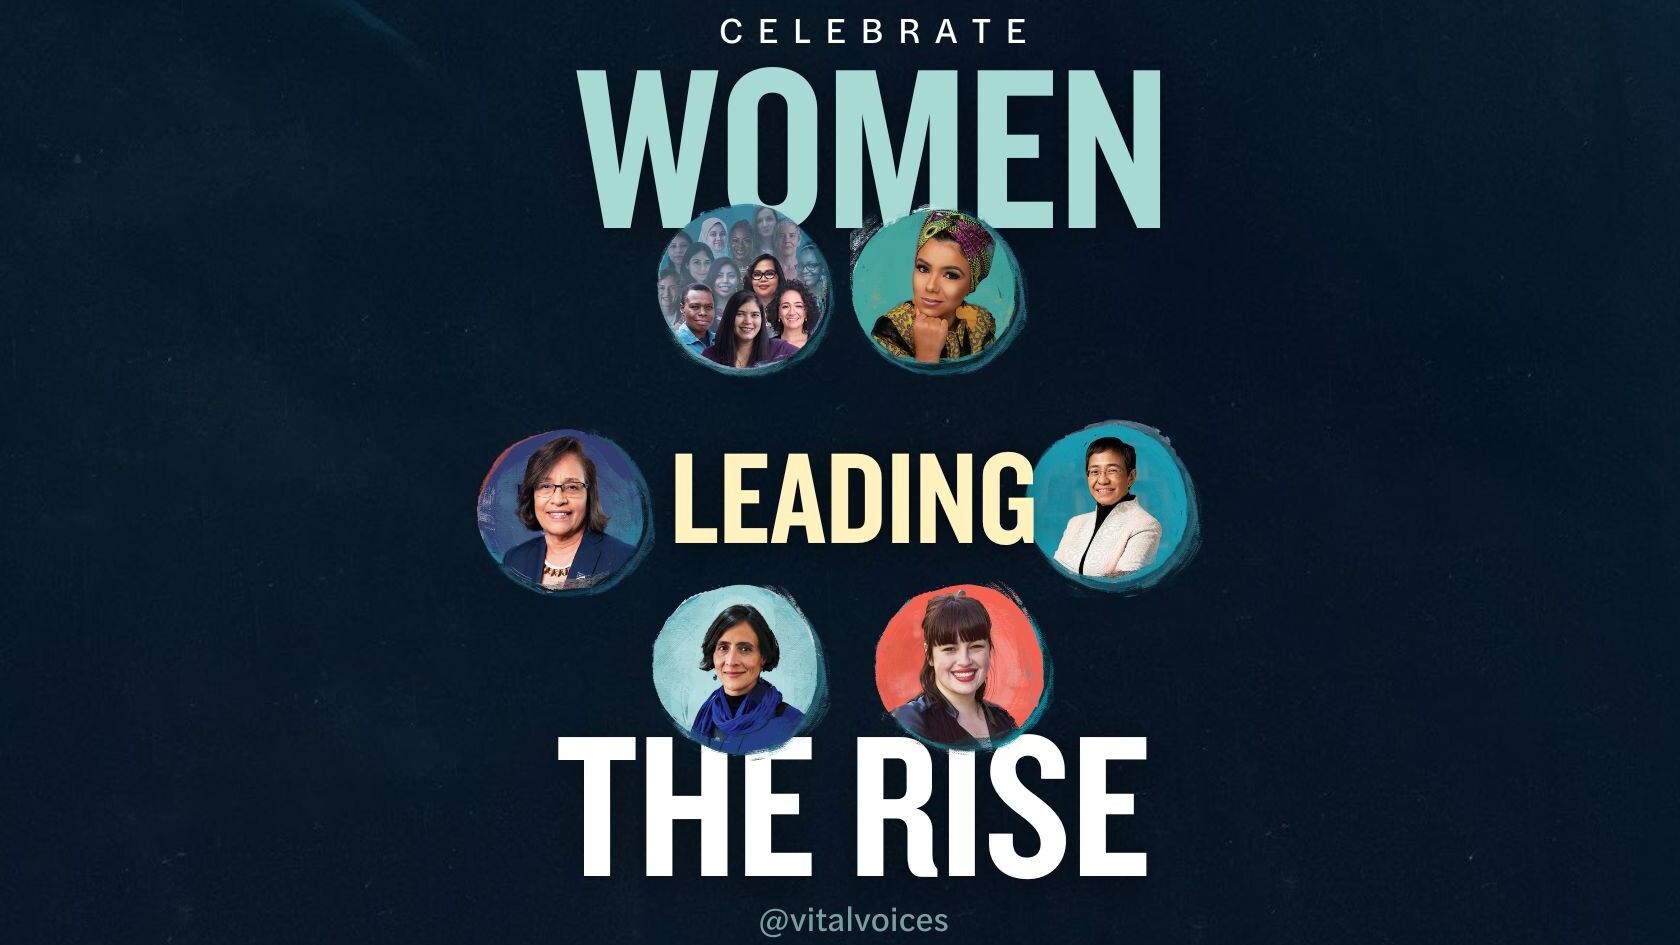 Women Leading the Rise homepage